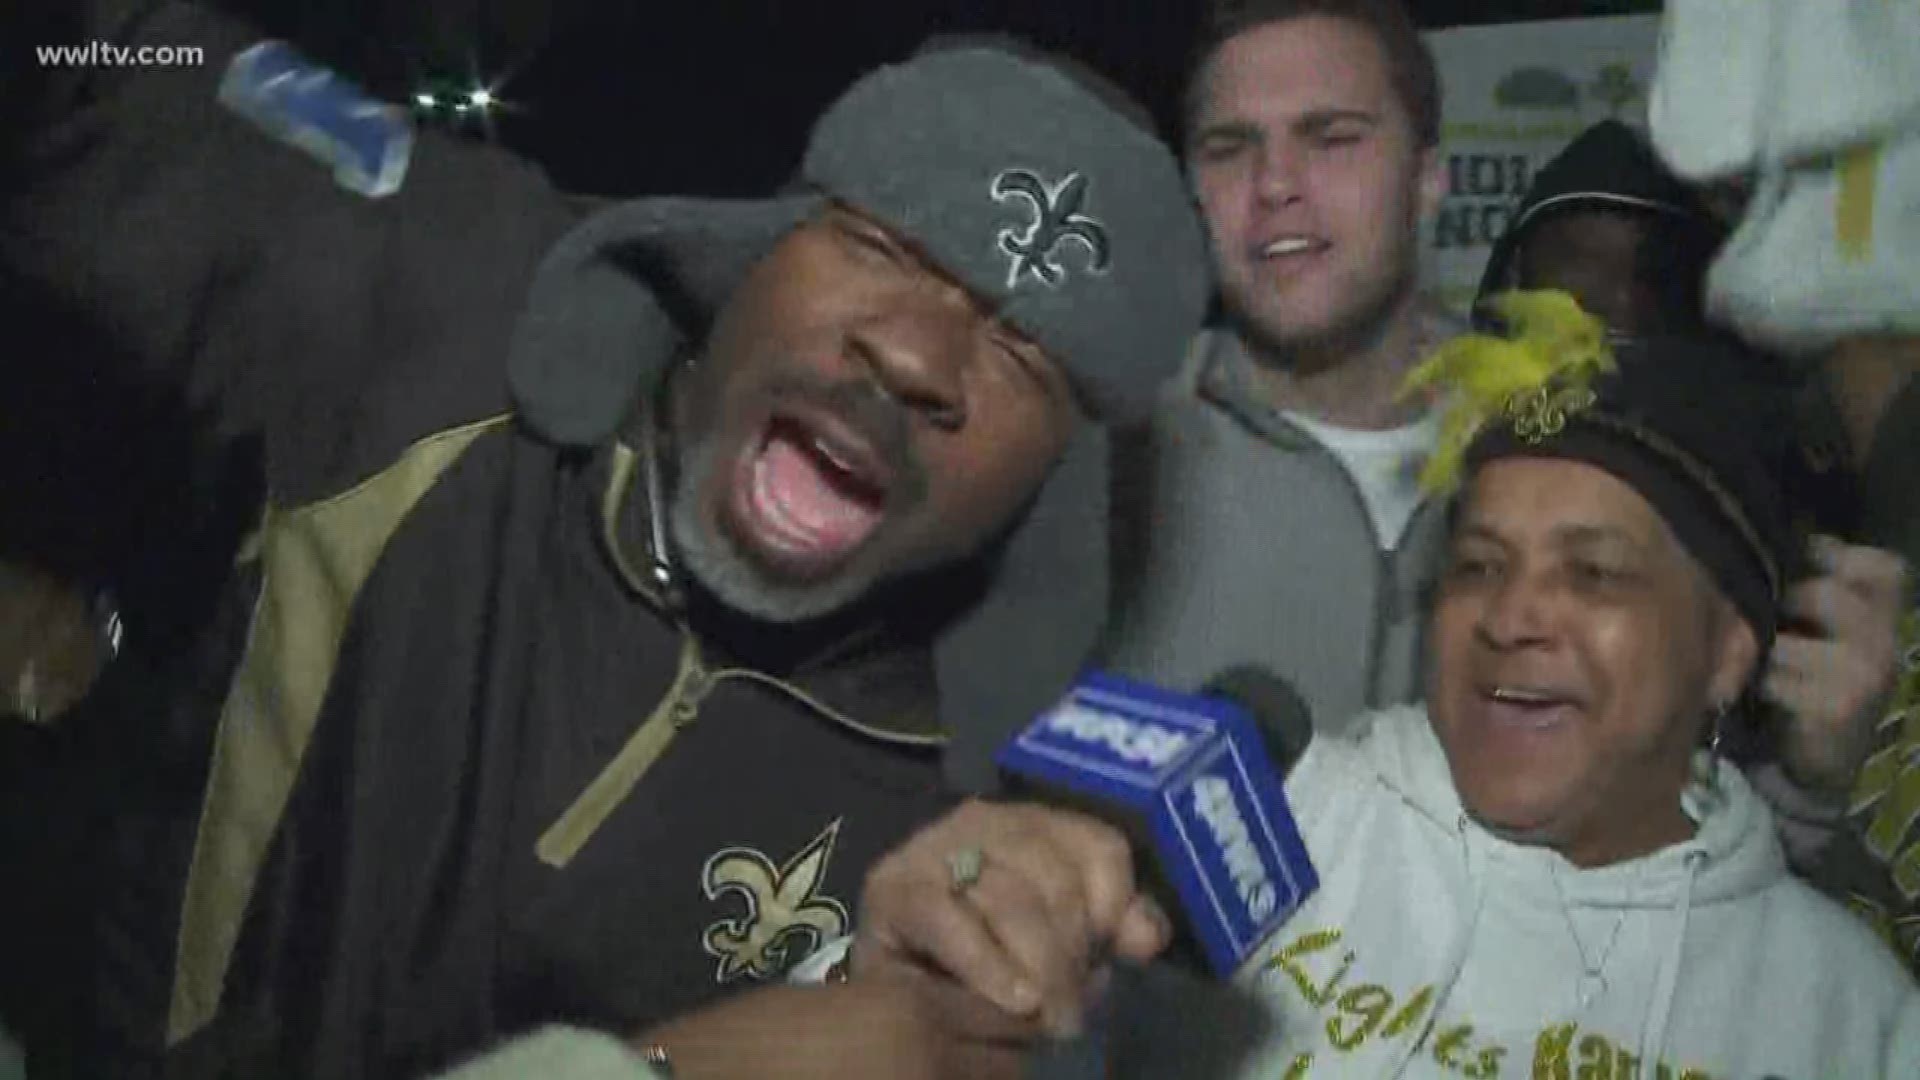 New Orleans Saints fans were celebrating big time after the comeback win over the Philadelphia Eagles to advance to the NFC Championship.